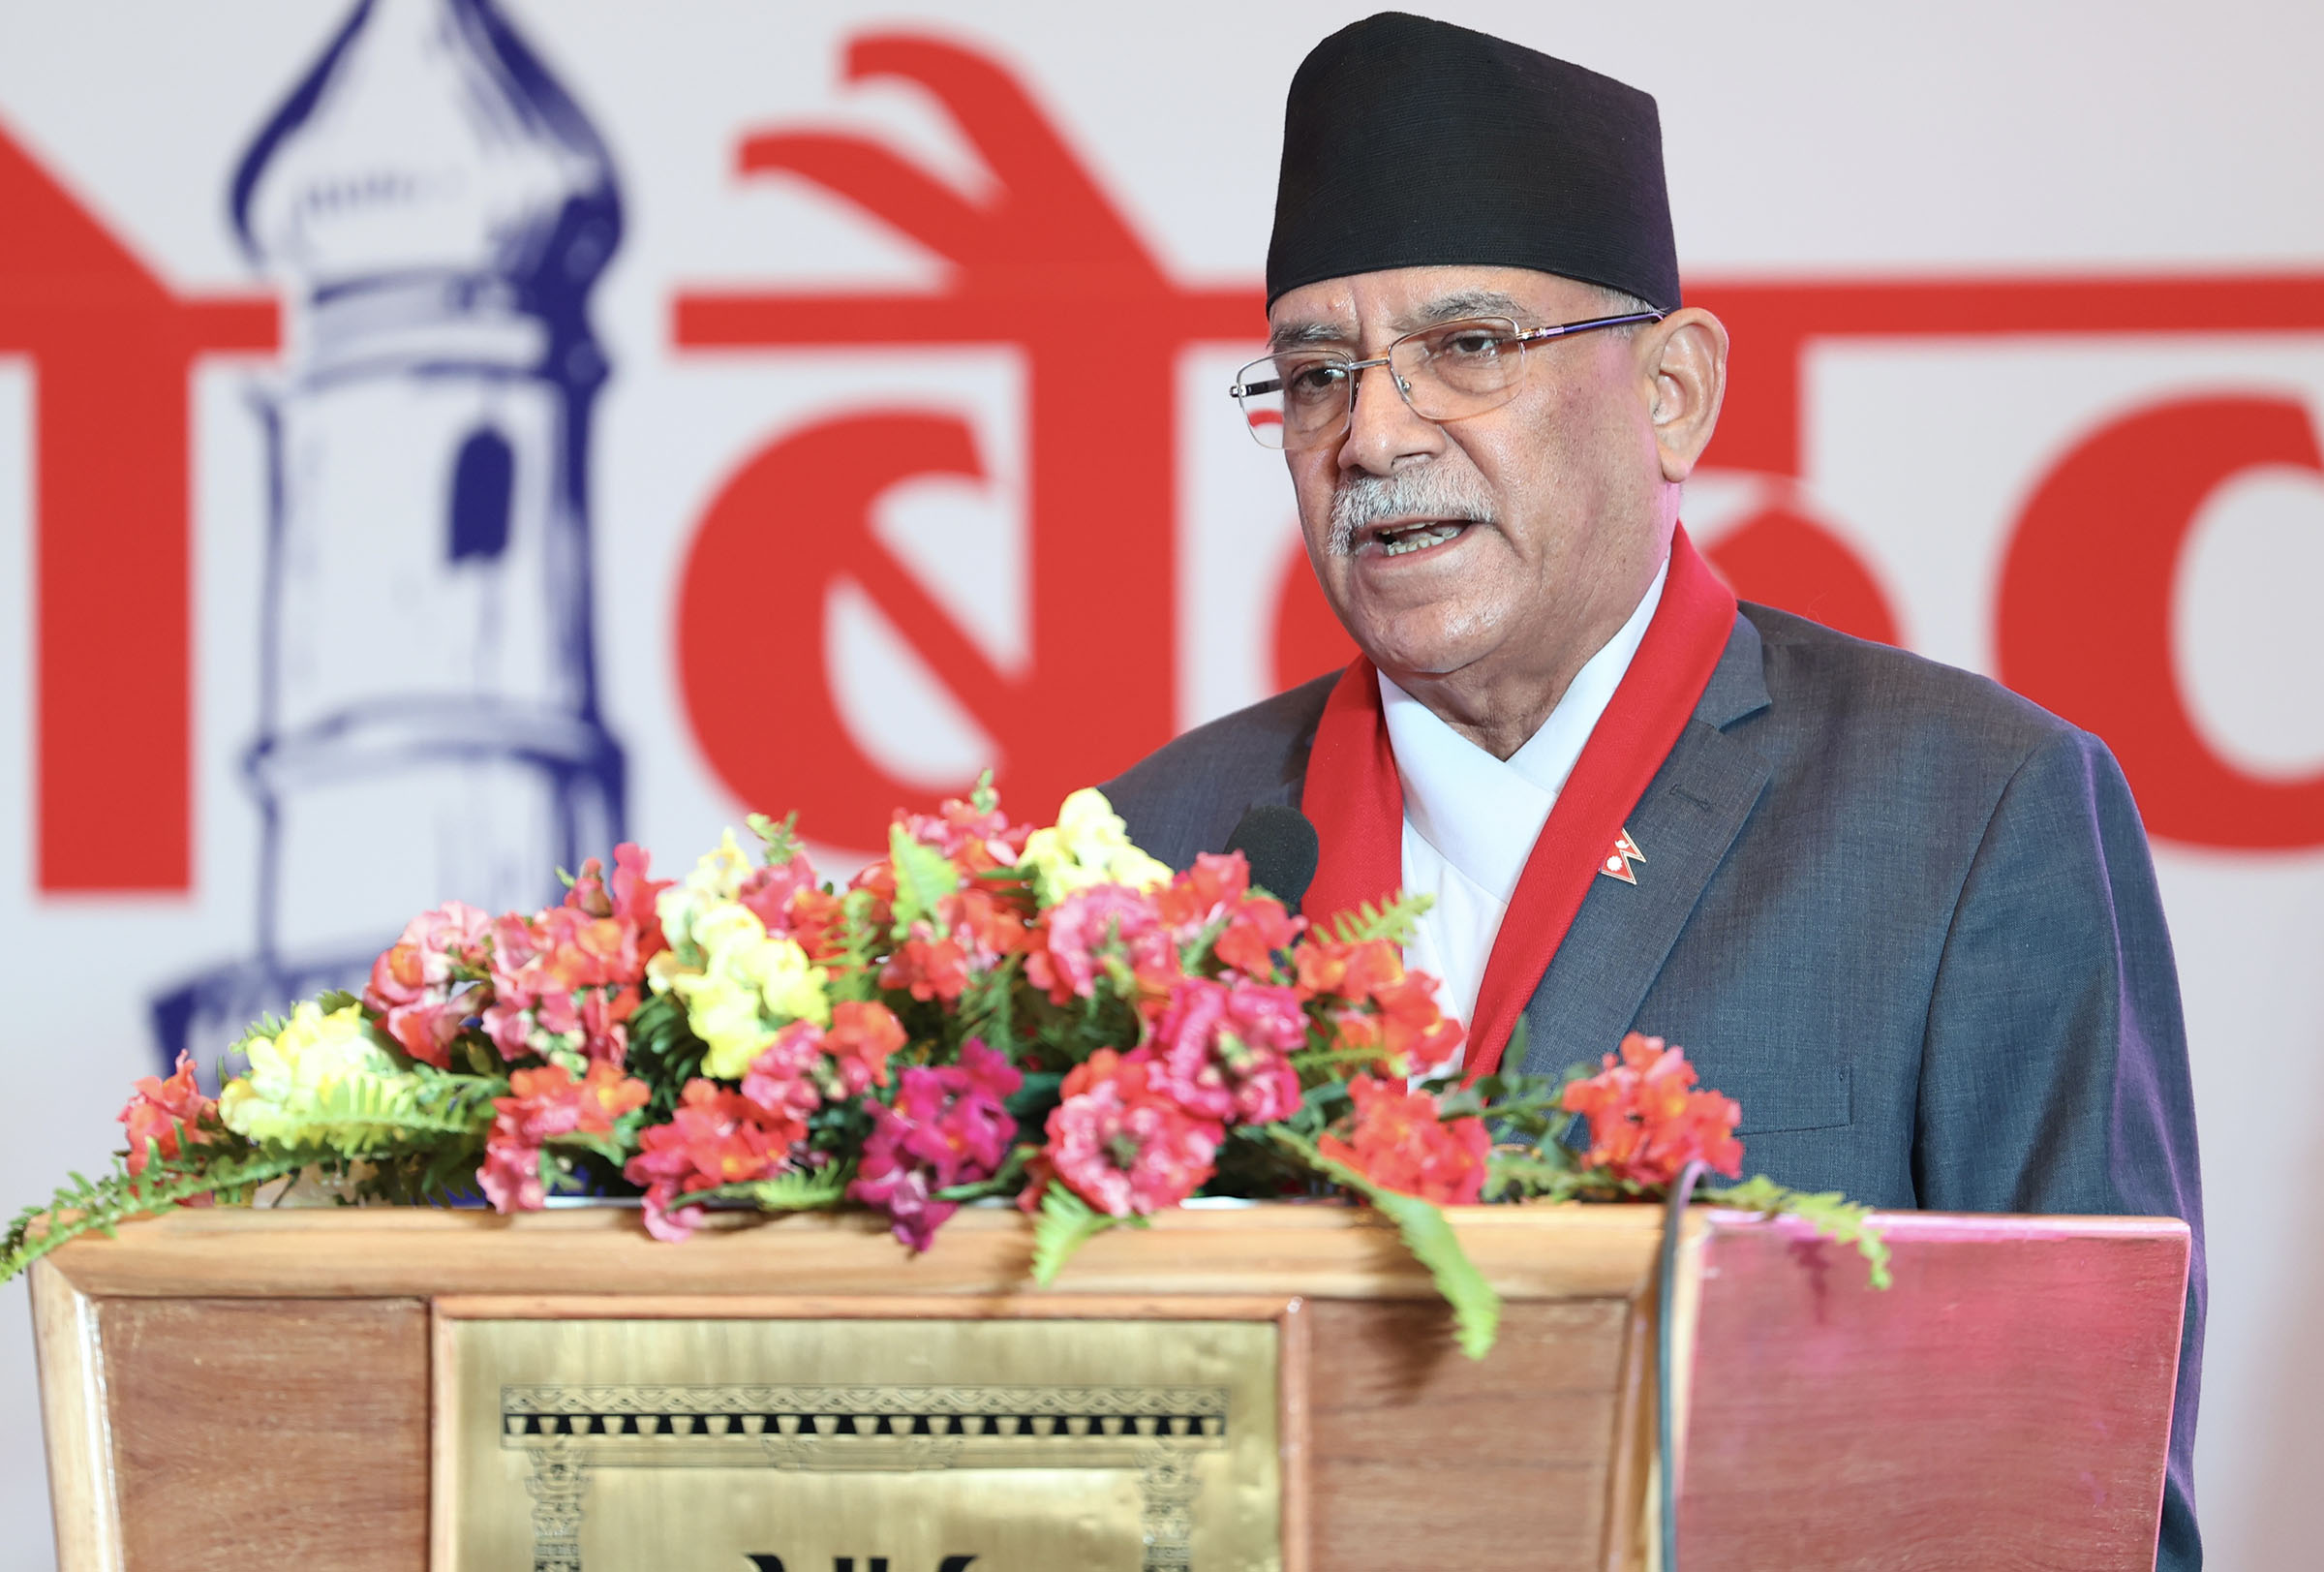 16th Plan stresses on integrated infrastructure development, IT use: PM Dahal